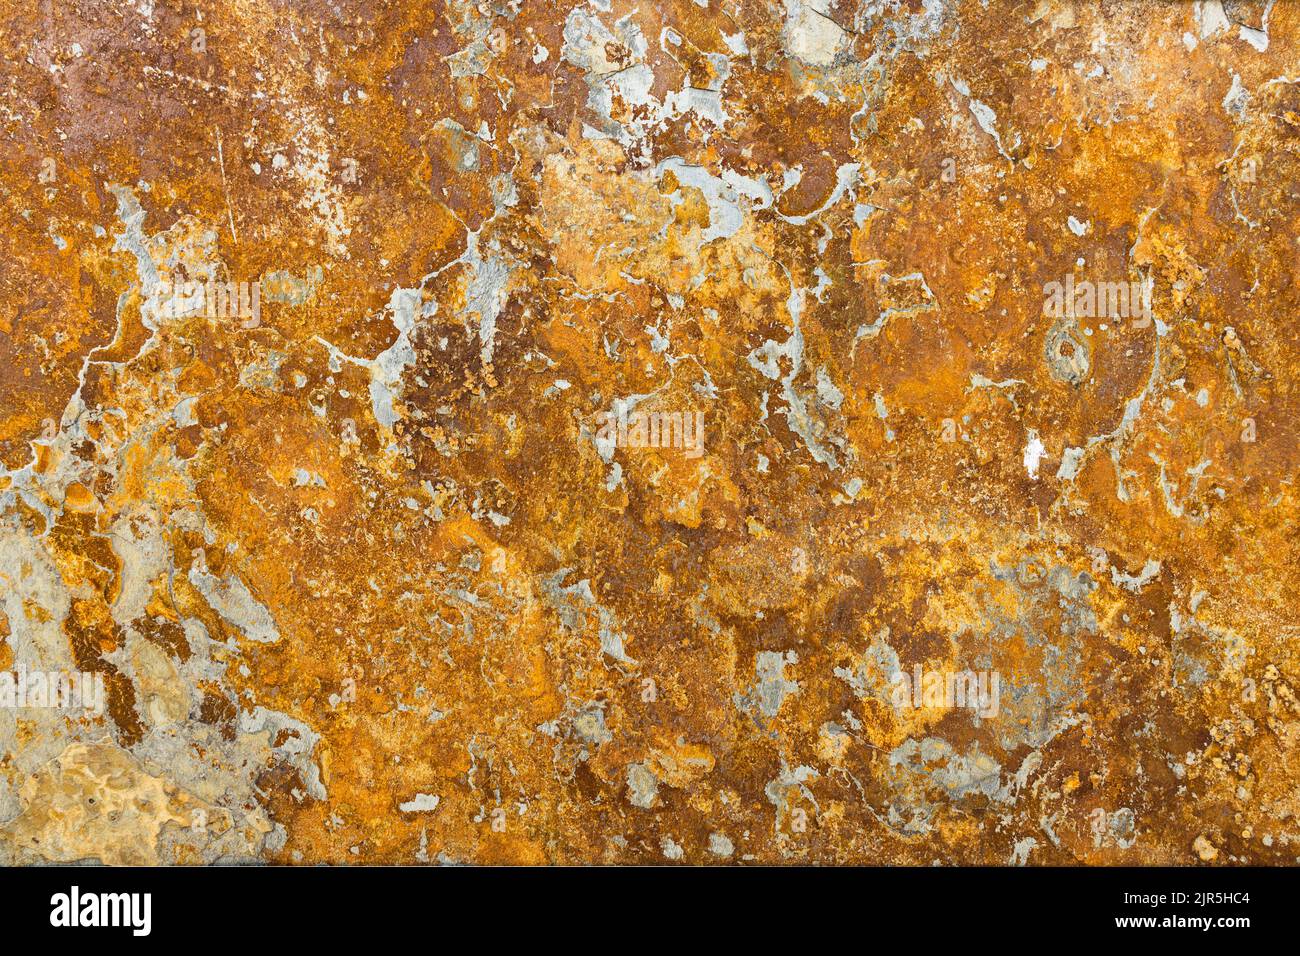 Rusty grunge surface texture background. Old metal iron panel Stock Photo